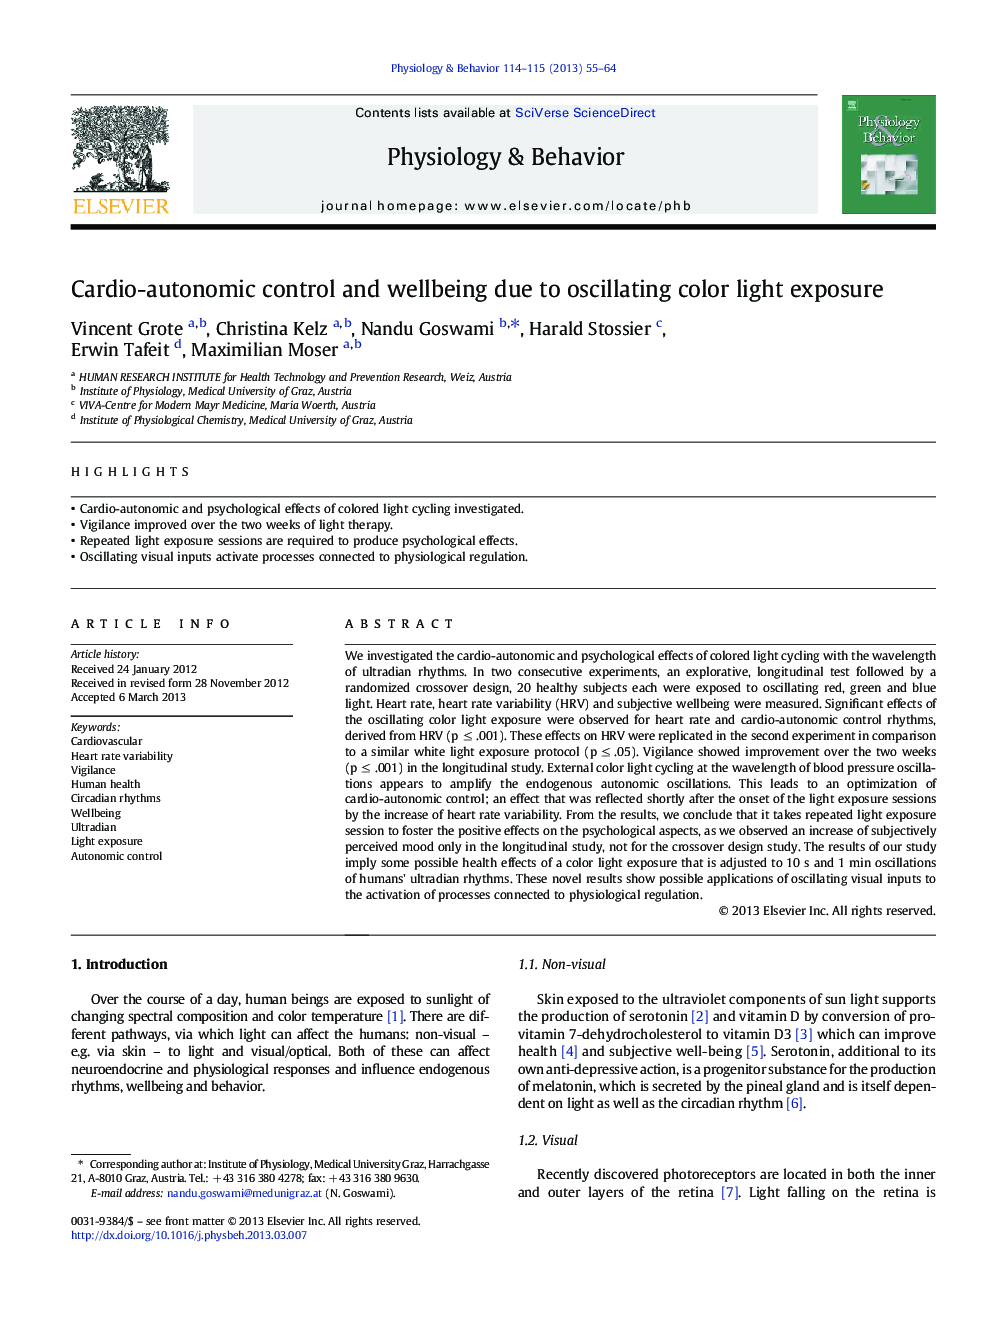 Cardio-autonomic control and wellbeing due to oscillating color light exposure